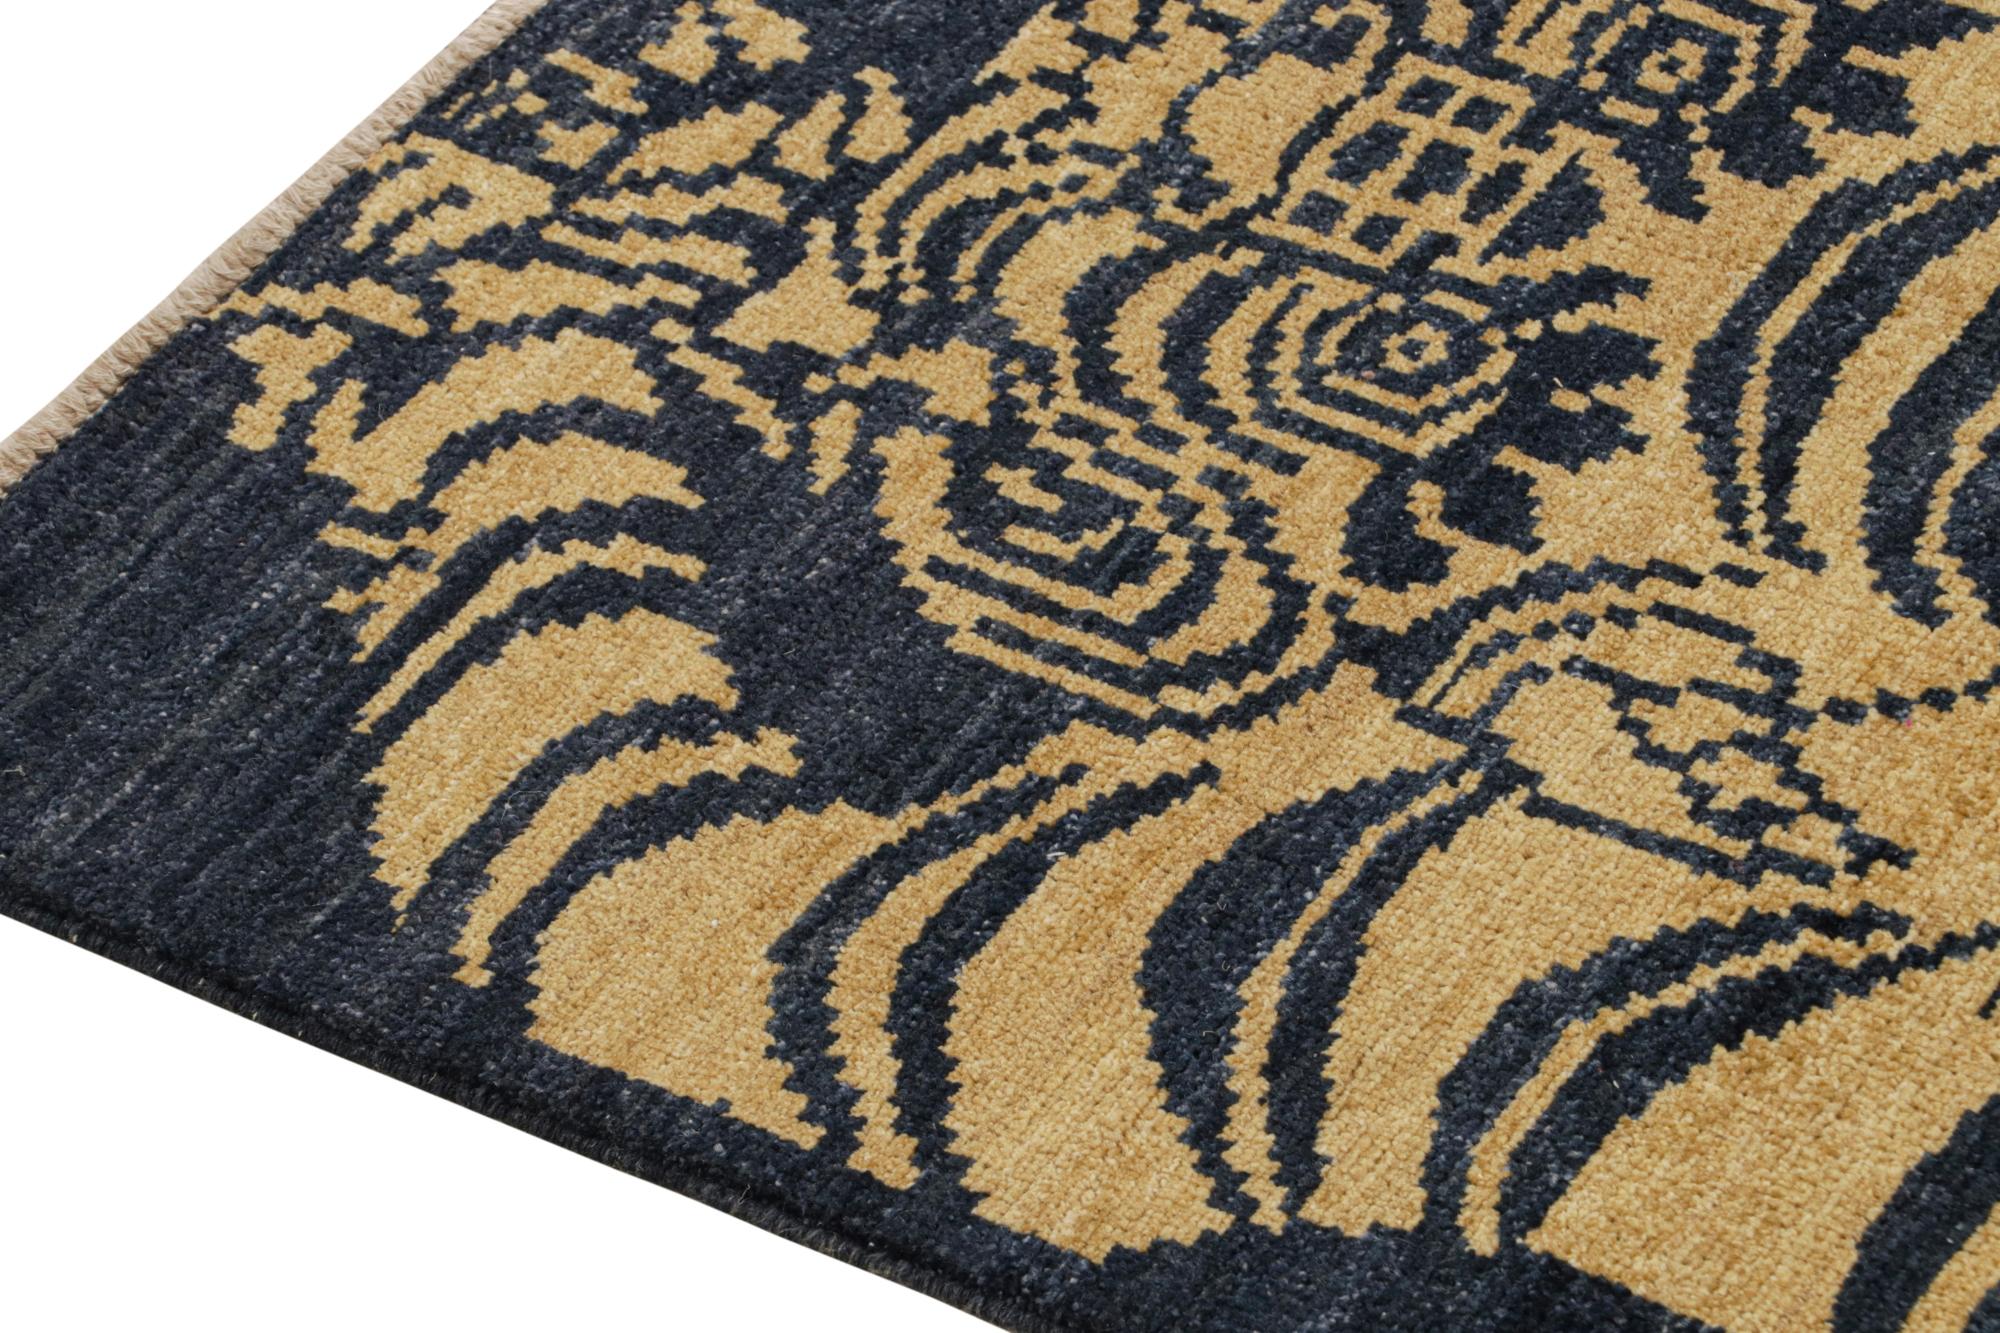 Pakistani Rug & Kilim’s Classic Style Tiger Runner in Navy Blue and Gold Pictorial For Sale